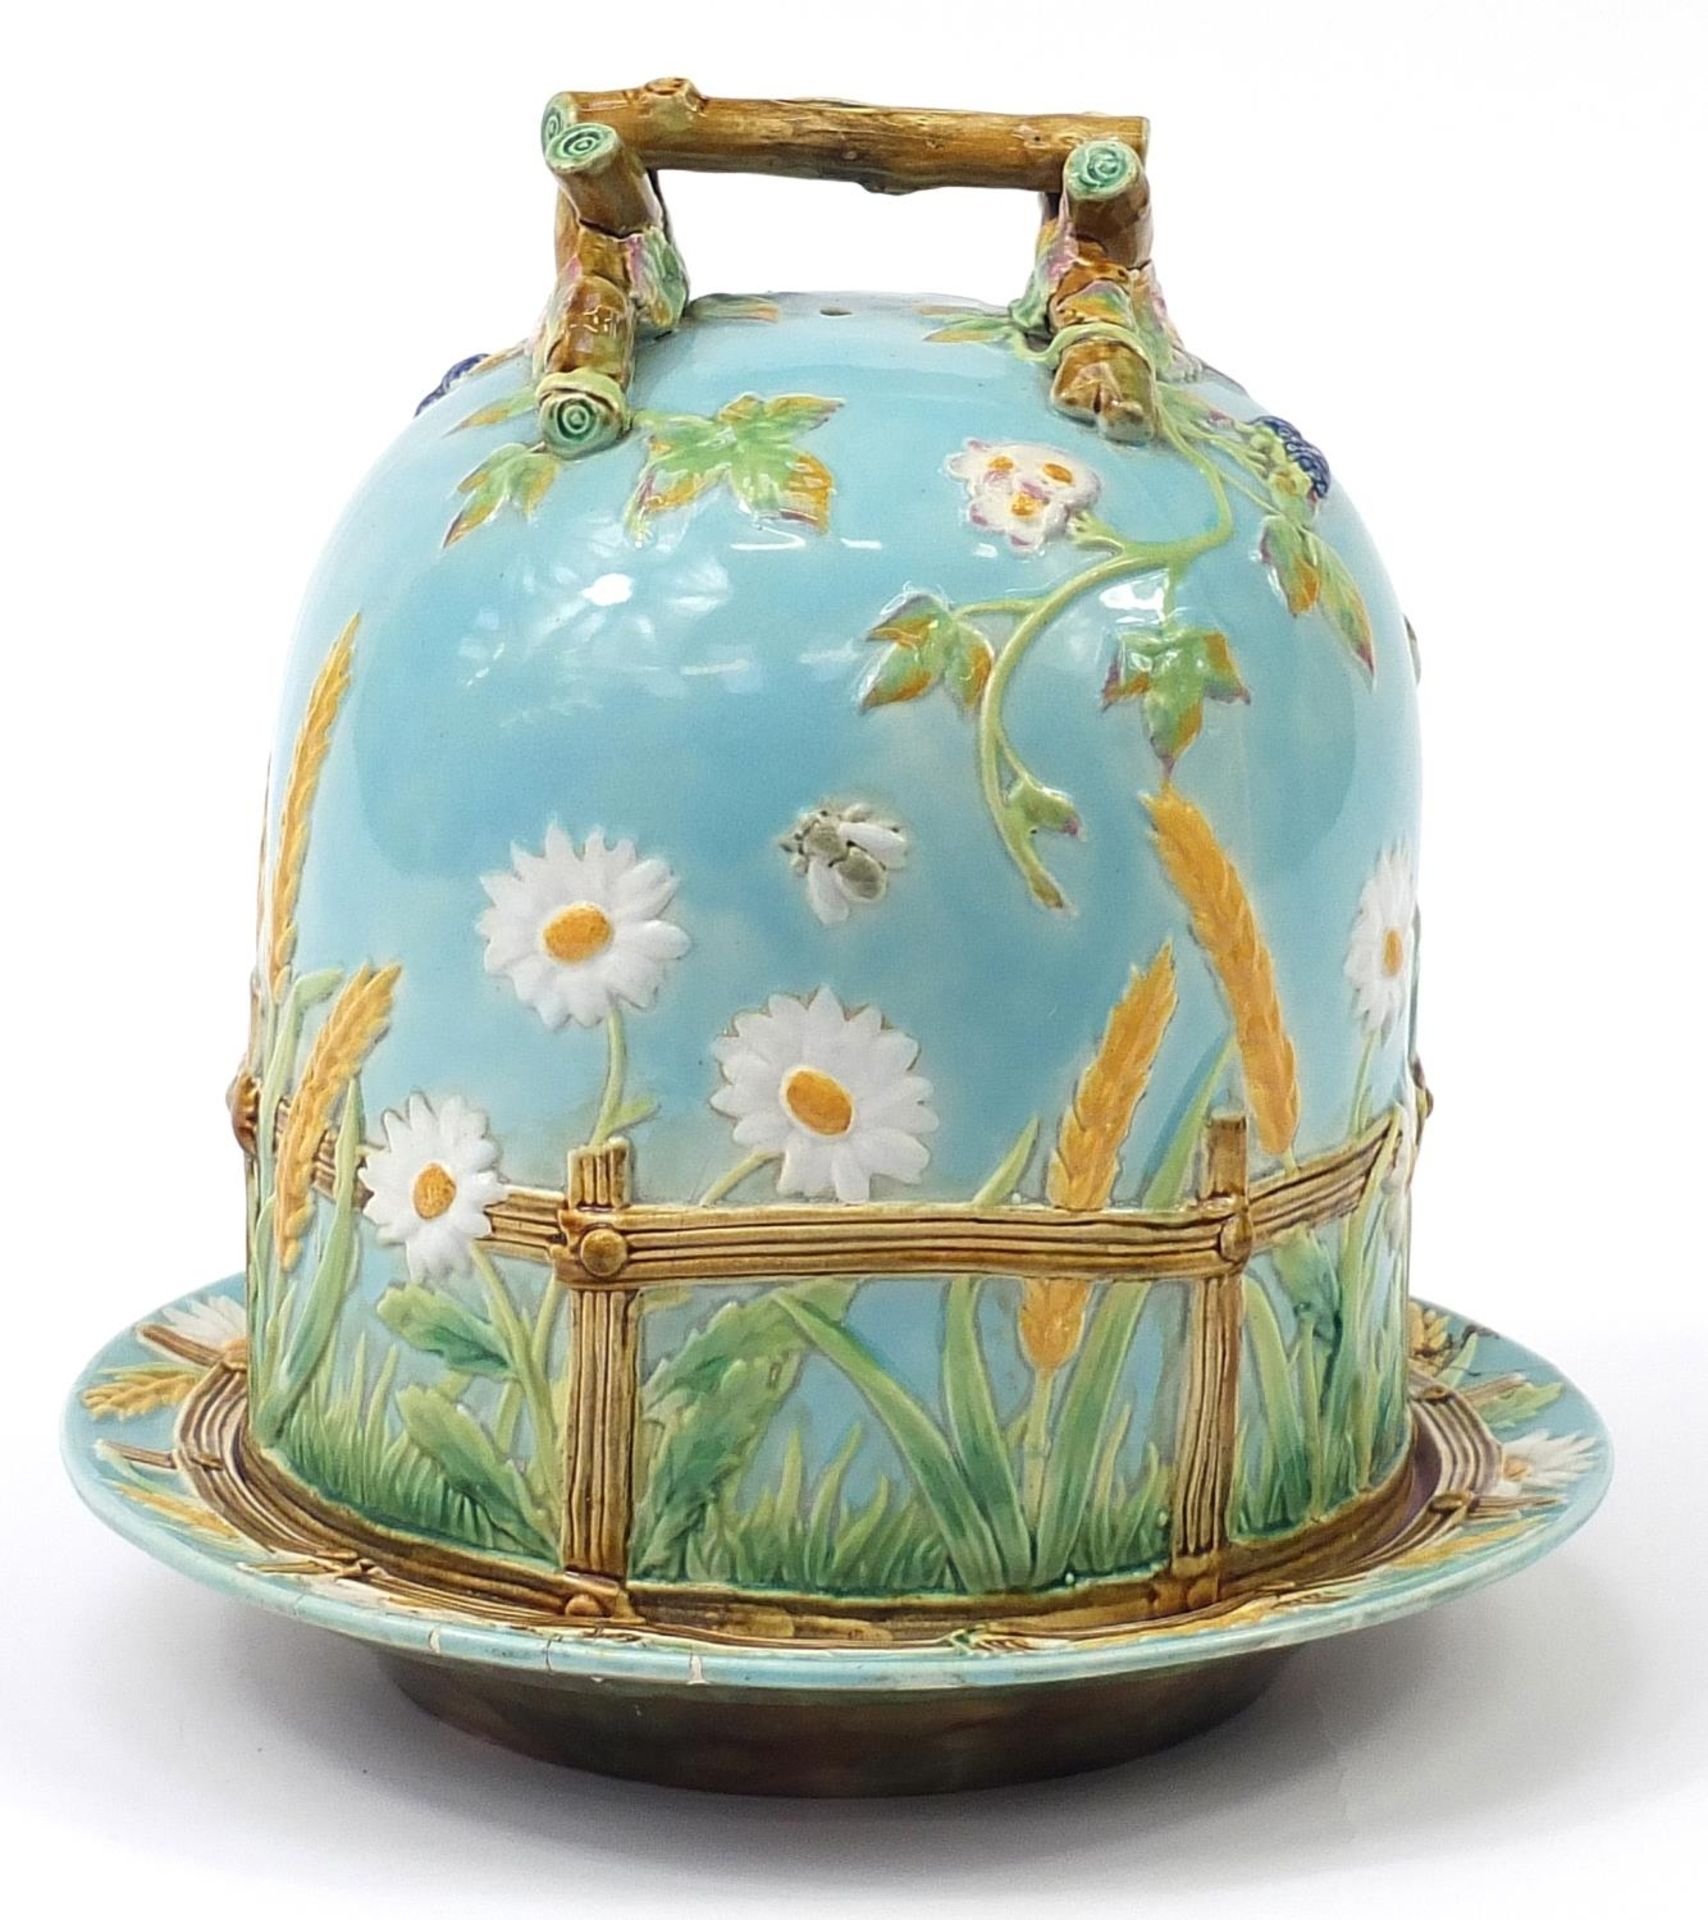 George Jones for Crescent, Victorian Majolica cheese dome on stand hand painted with insects and - Image 2 of 5